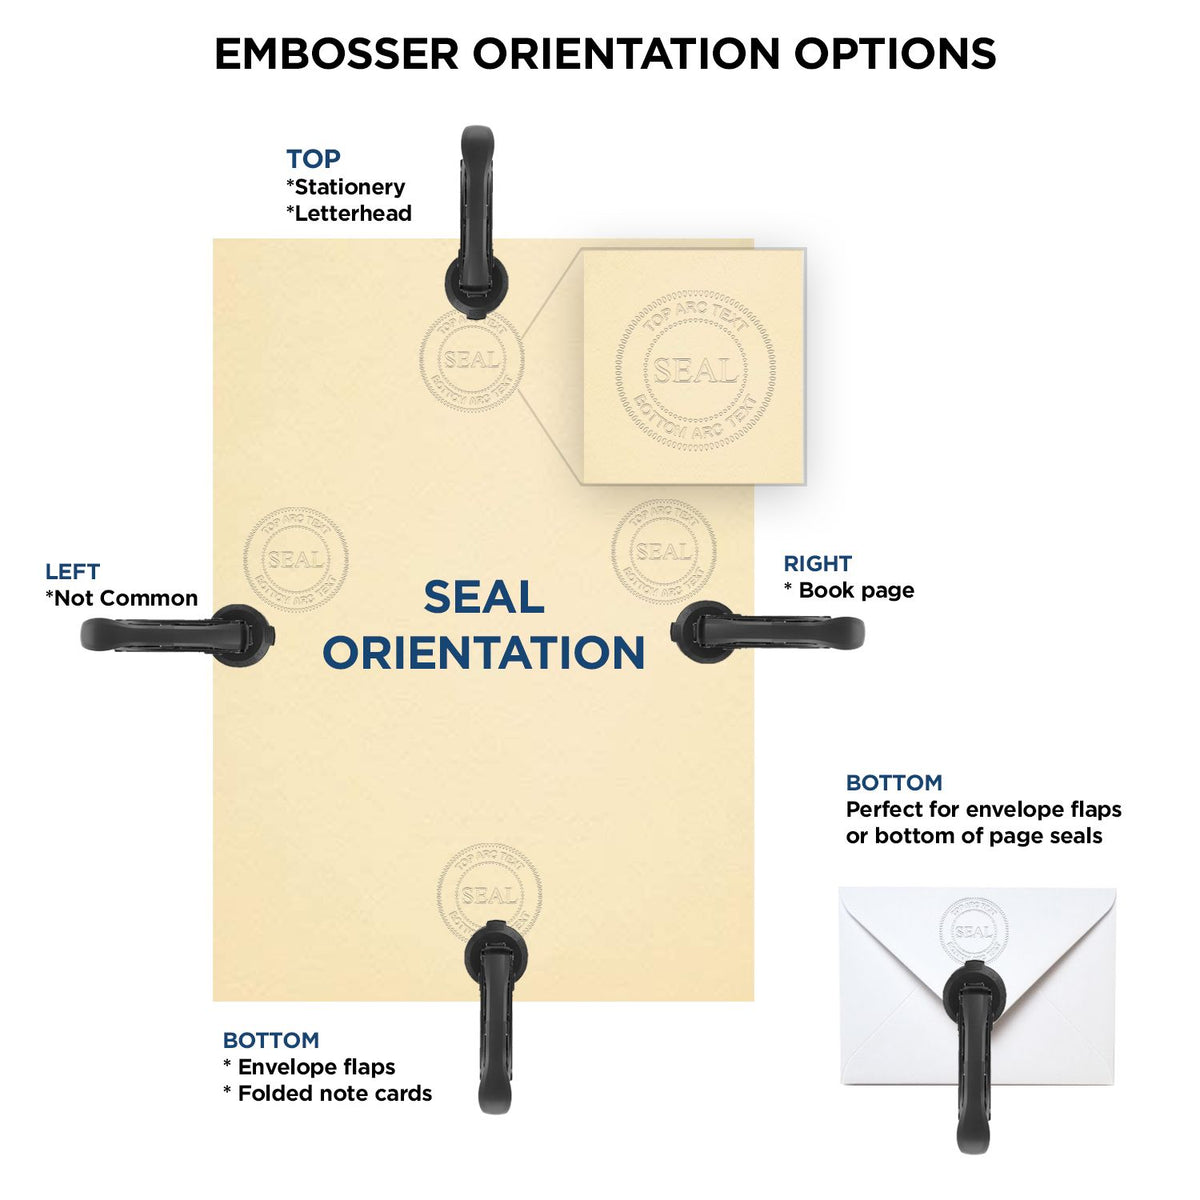 An infographic for the Hybrid Montana Land Surveyor Seal showing embosser orientation, this is showing examples of a top, bottom, right and left insert.